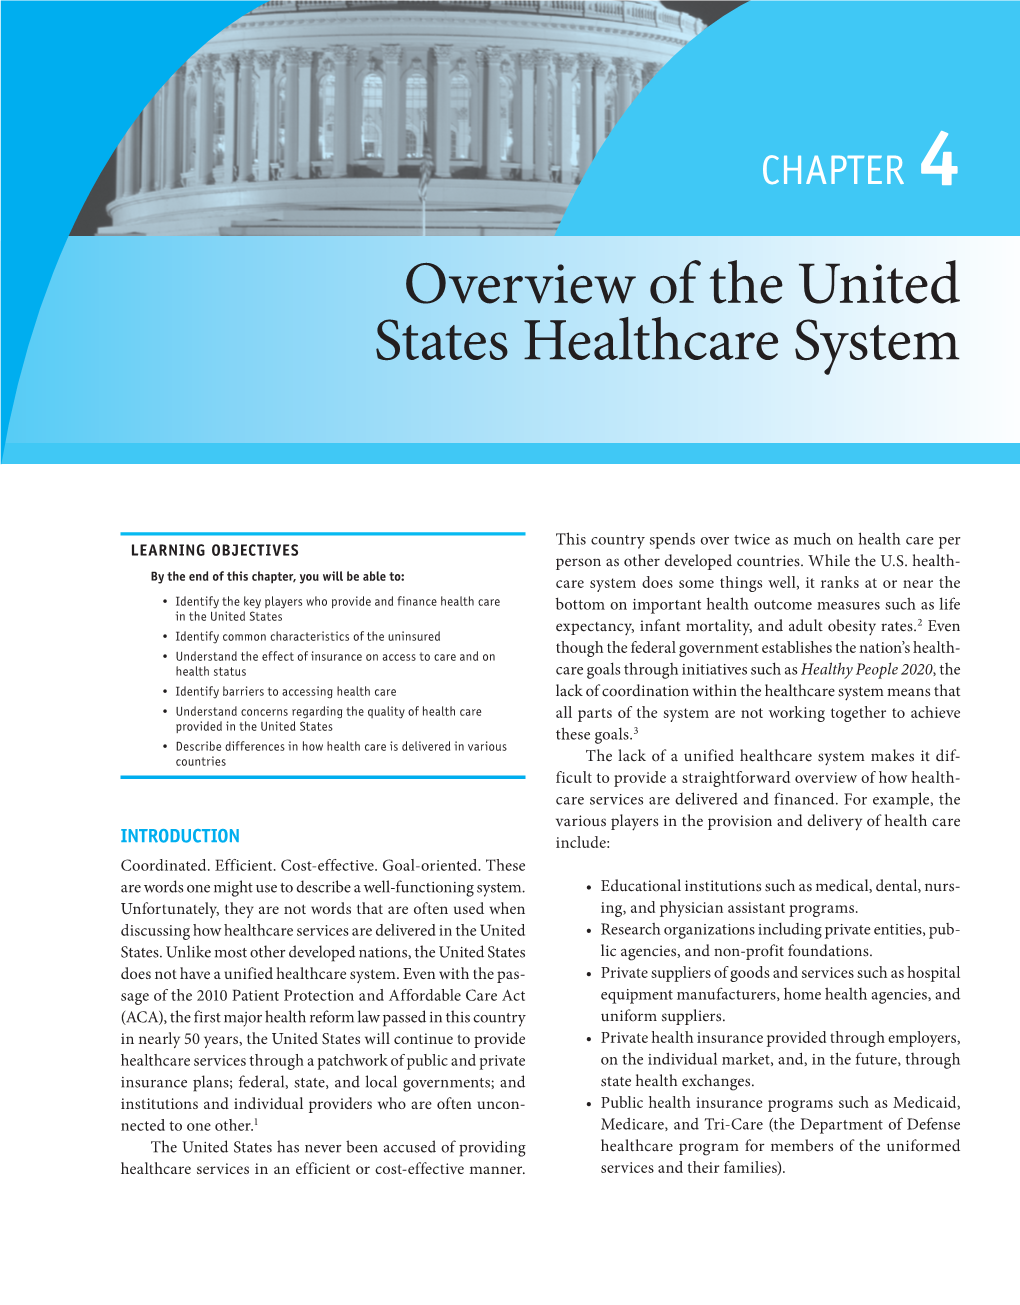 Overview of the United States Healthcare System